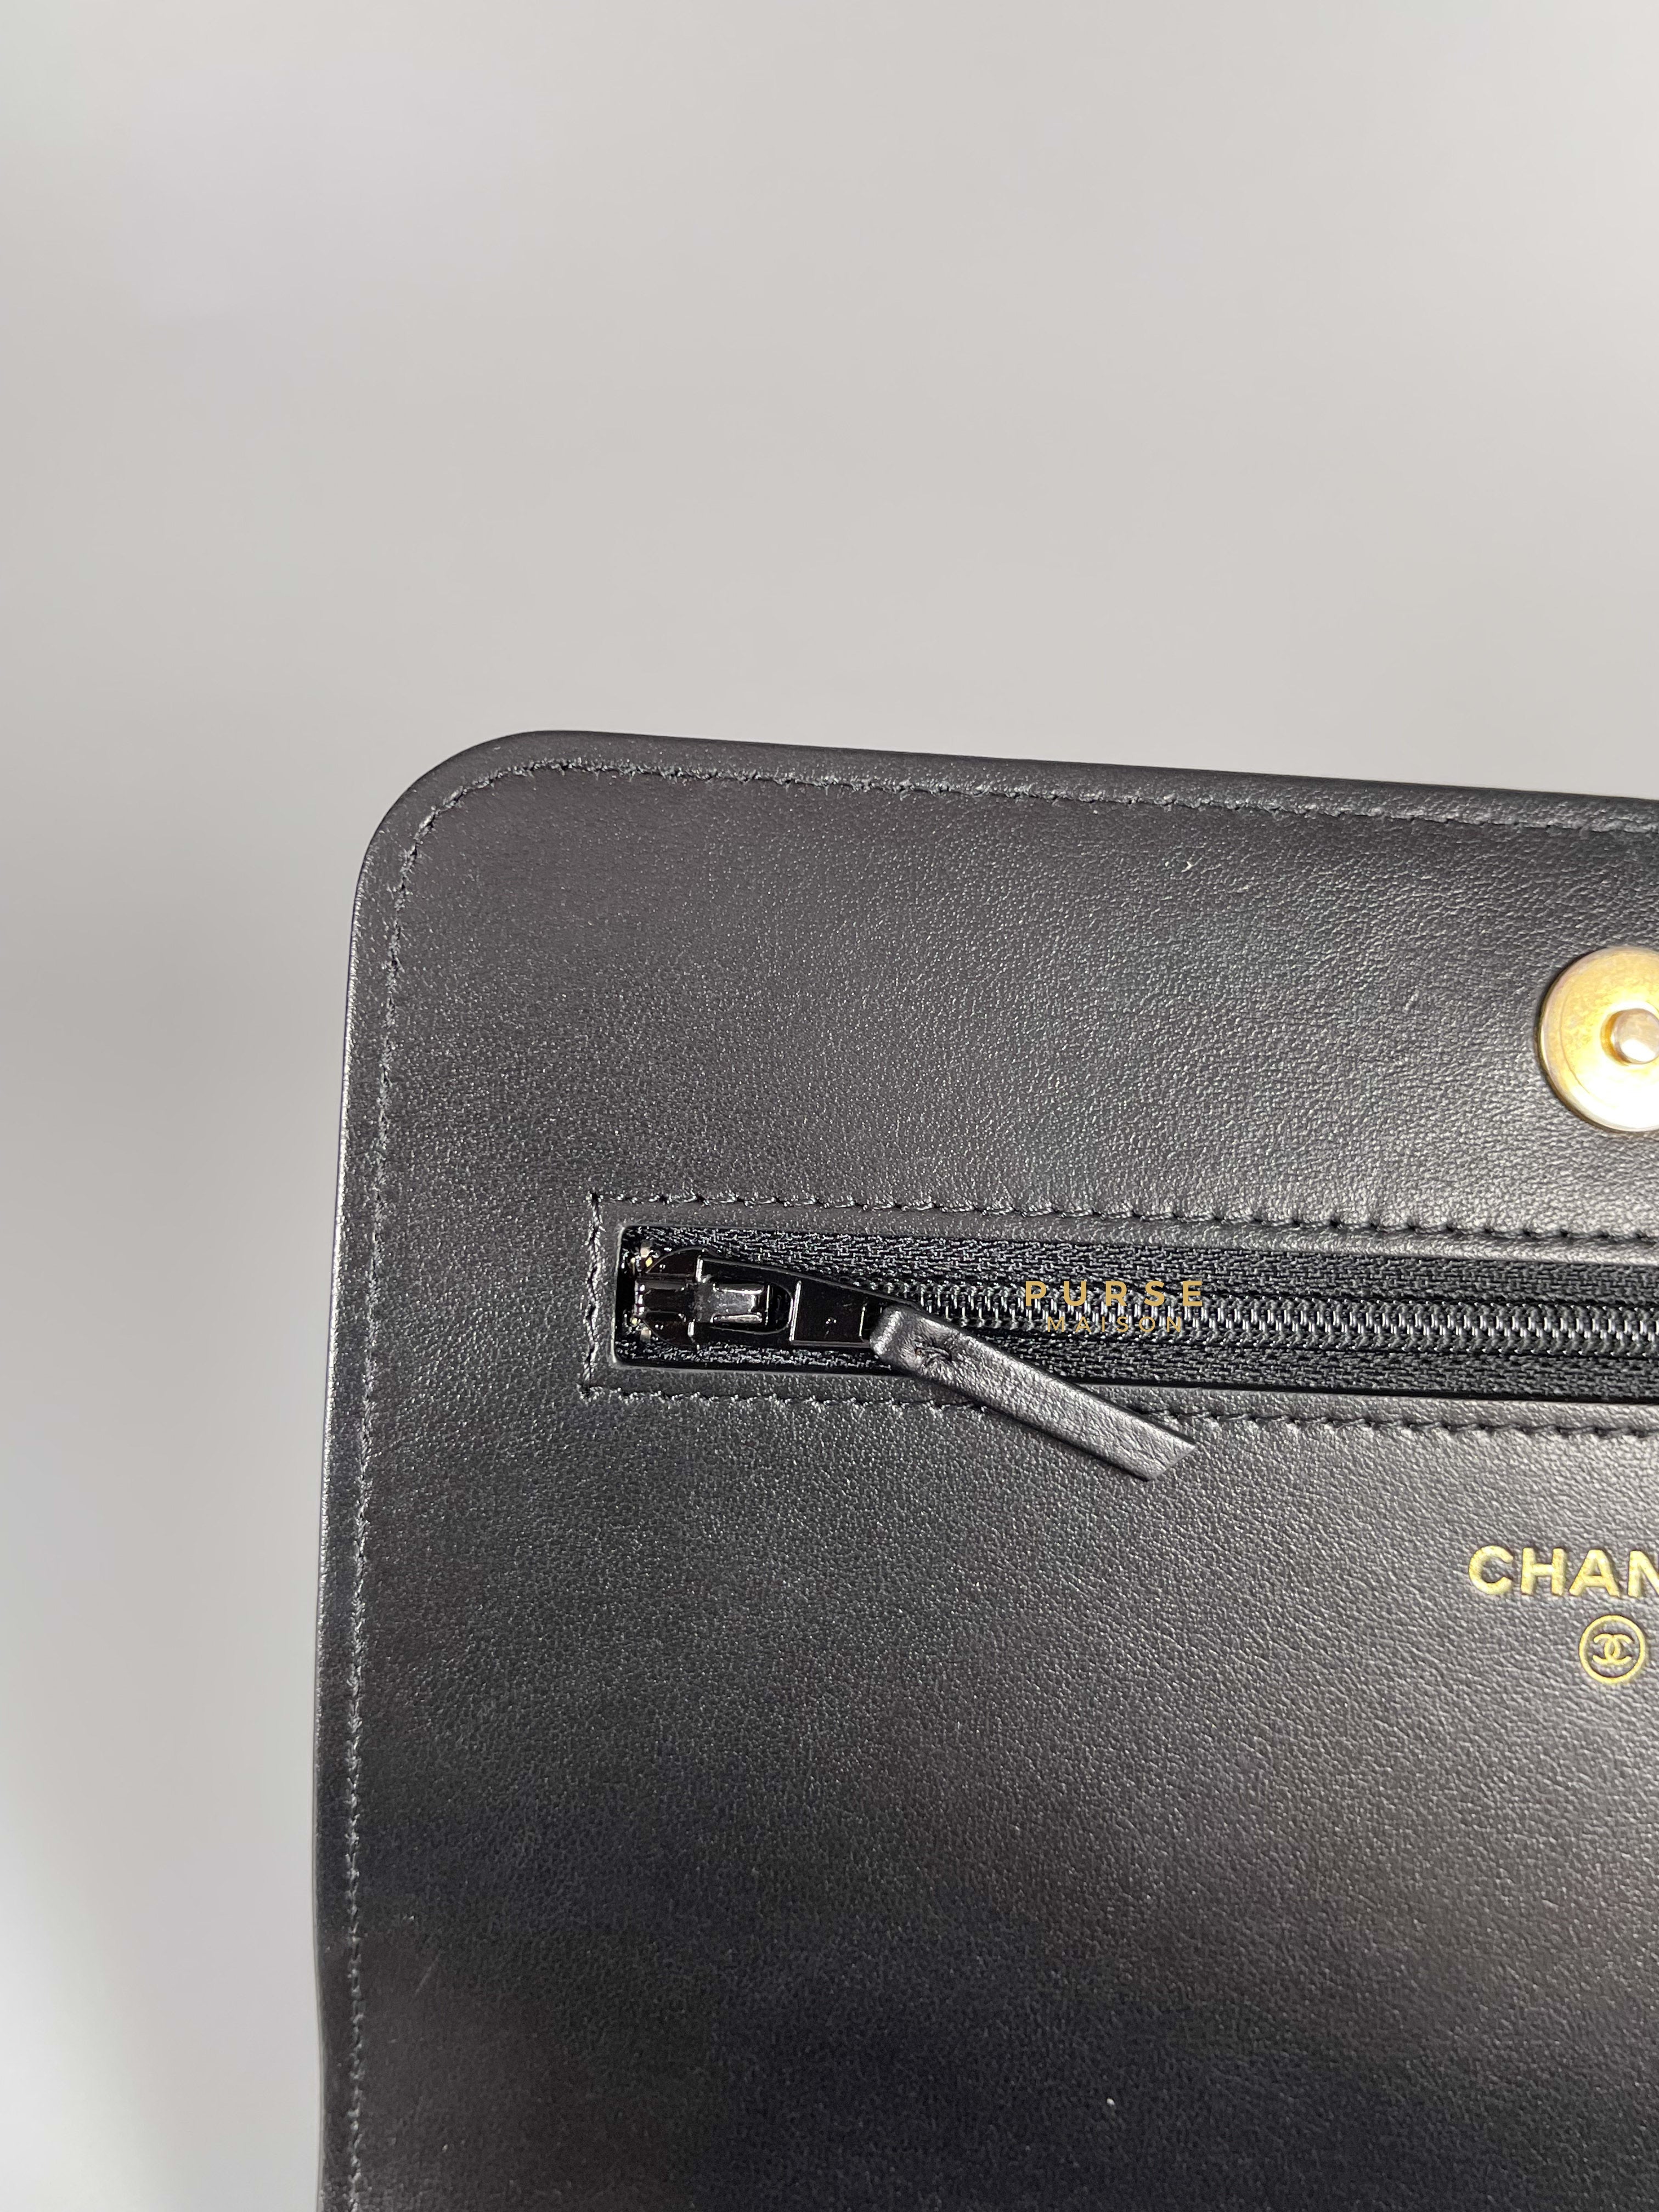 Chanel Boy Wallet on Chain (WOC) in Black Caviar Leather & Aged Gold Hardware (Series 30) | Purse Maison Luxury Bags Shop